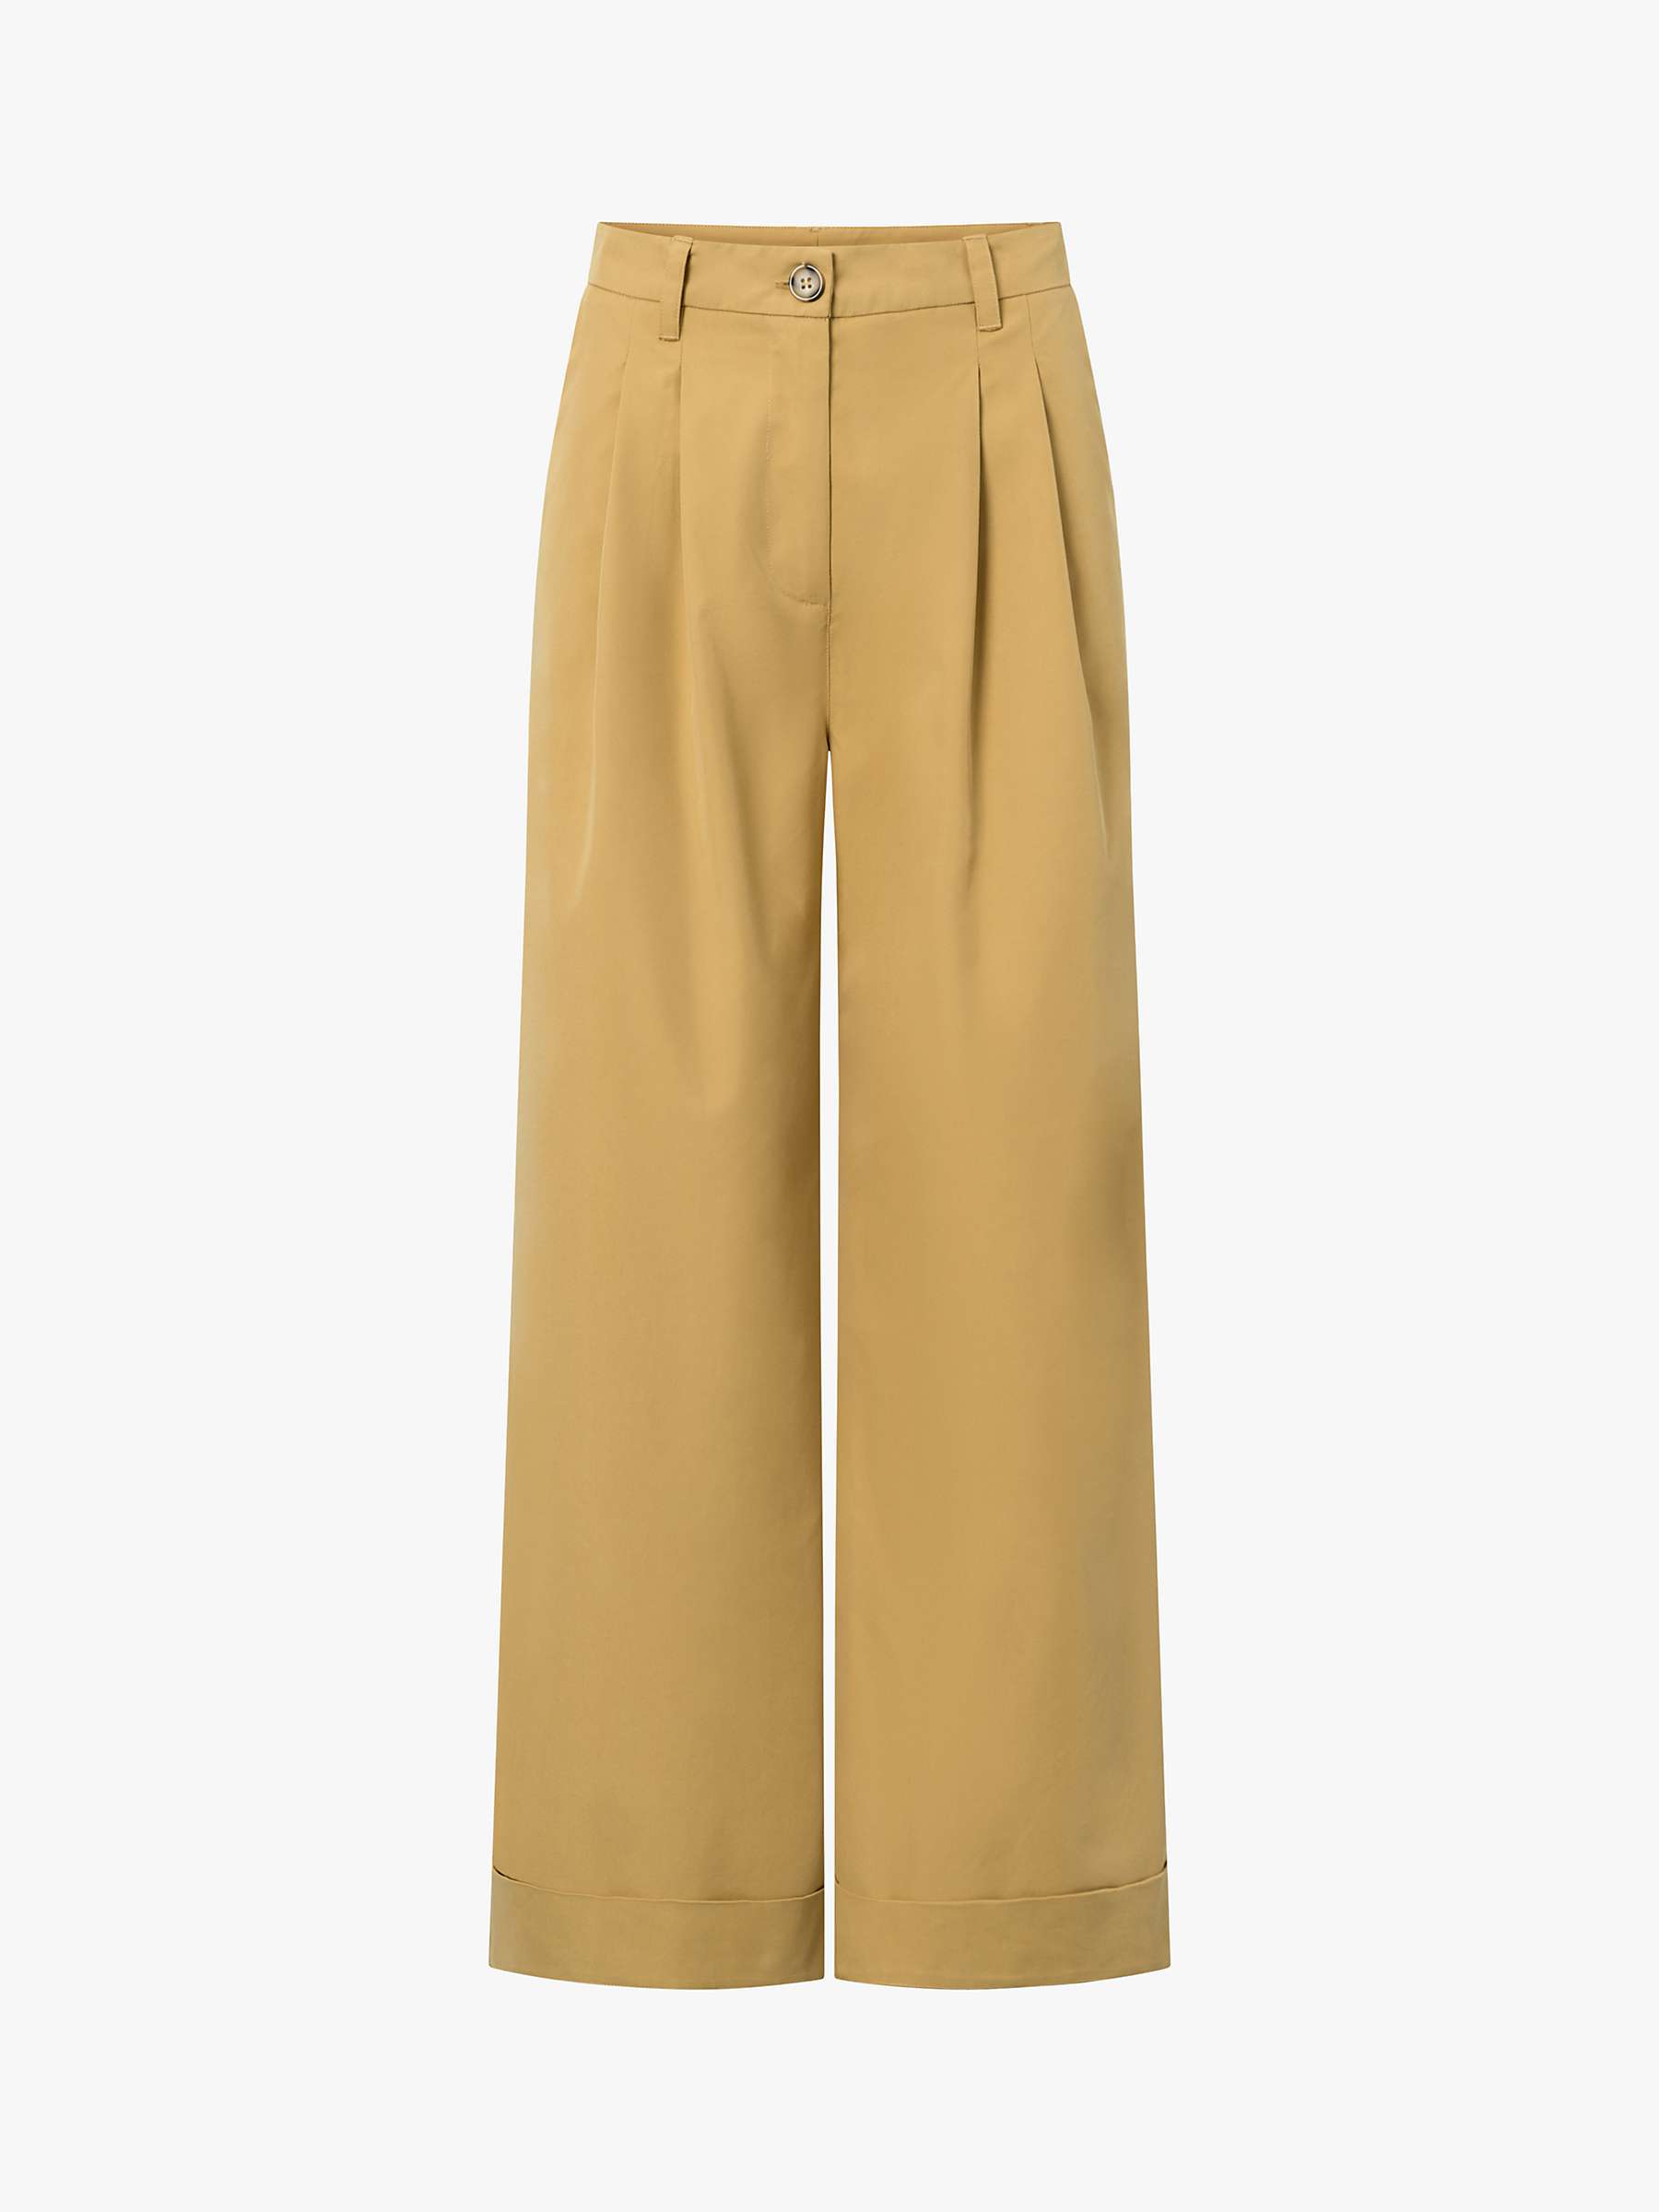 Buy nué notes Gosta Pleat Front Wide Leg Trousers, Antelope Online at johnlewis.com